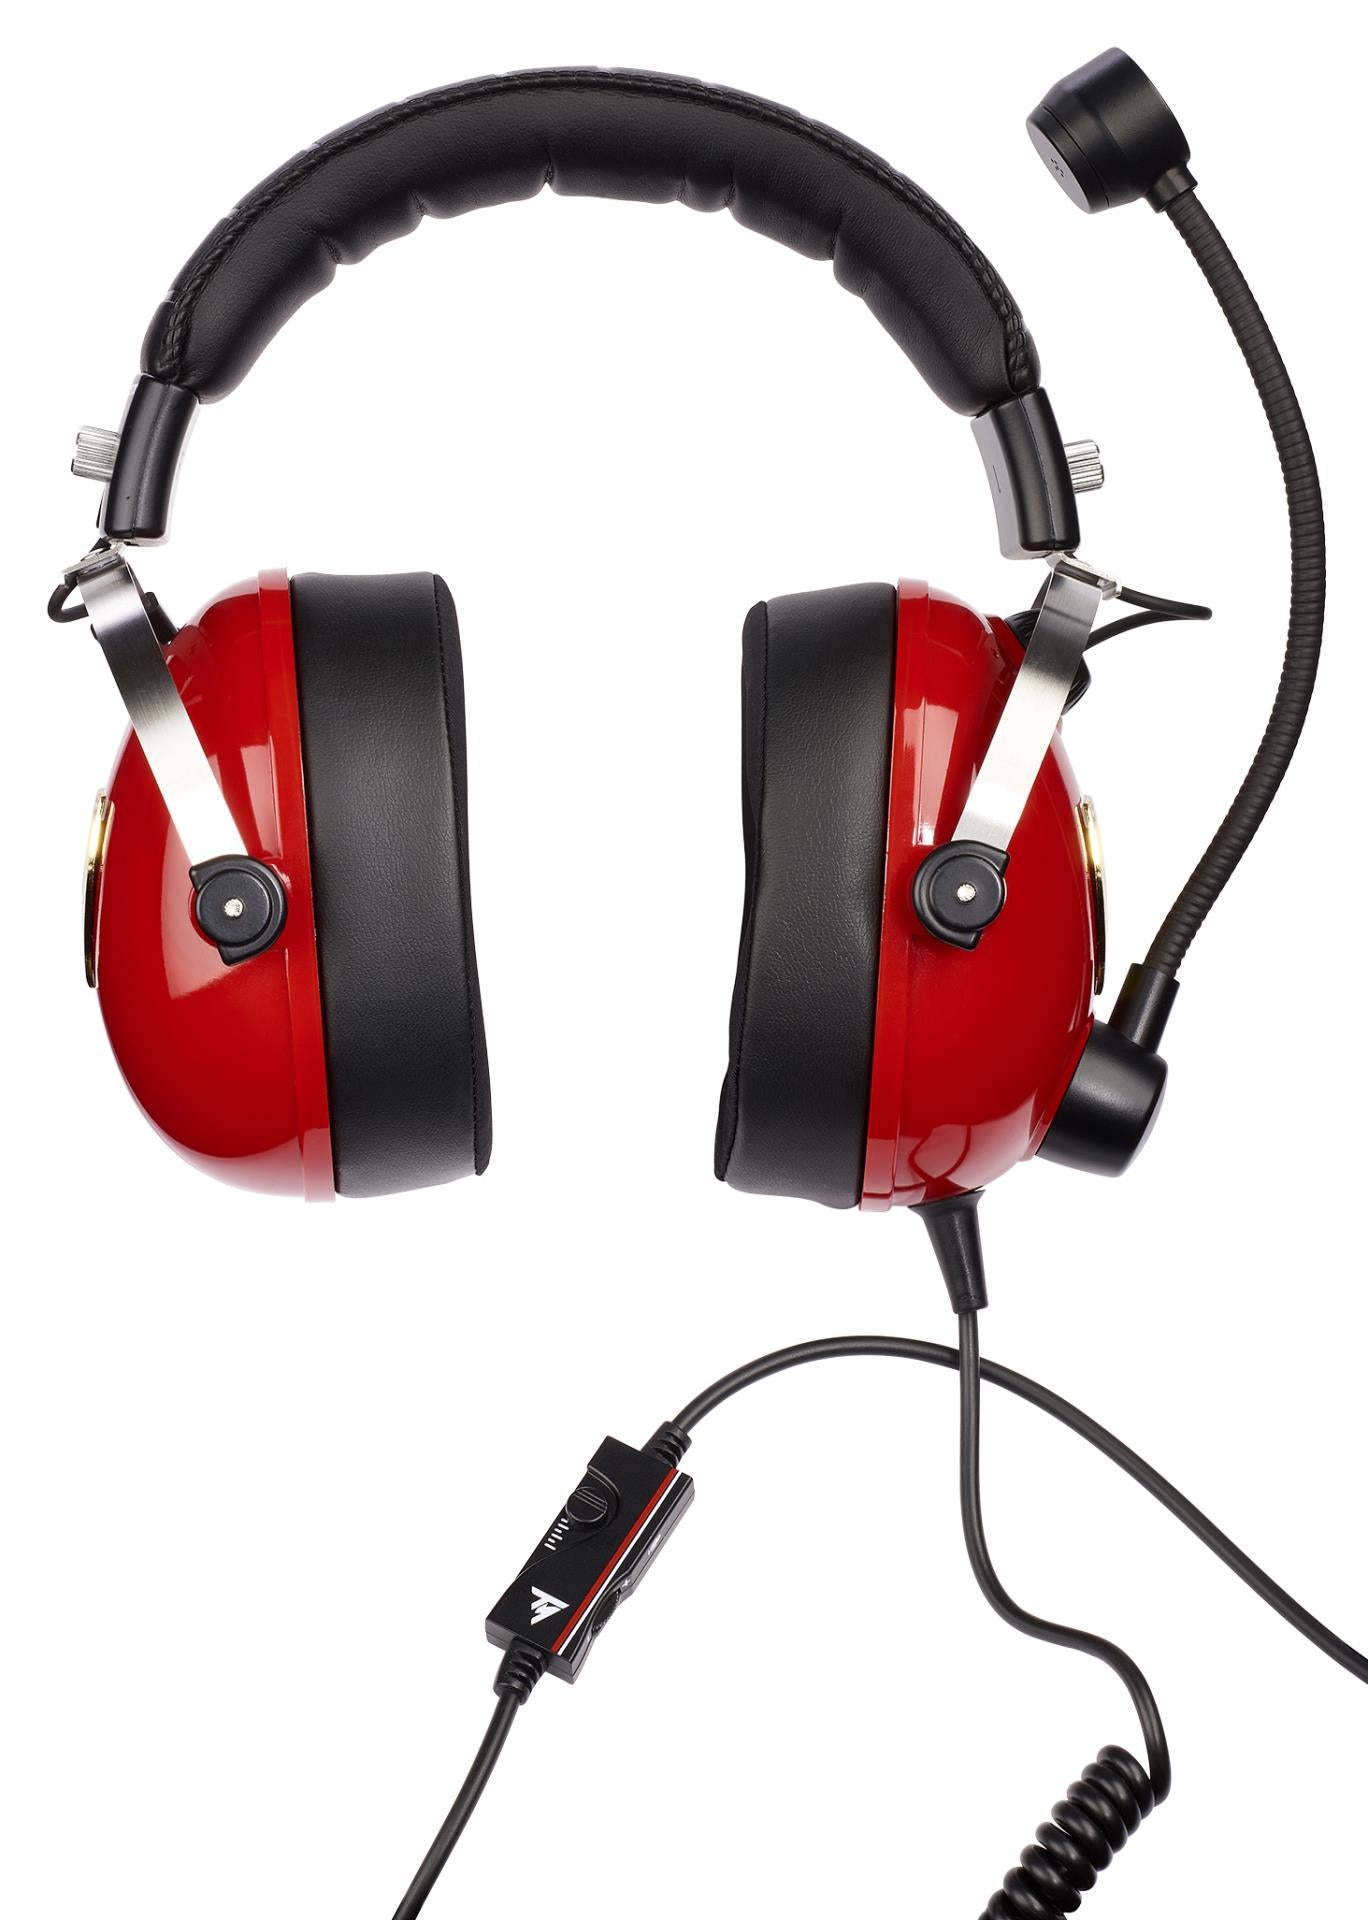 Thrustmaster T.Racing Gaming Headset Scuderia Ferrari Edition for PS4, Xbox One & PC